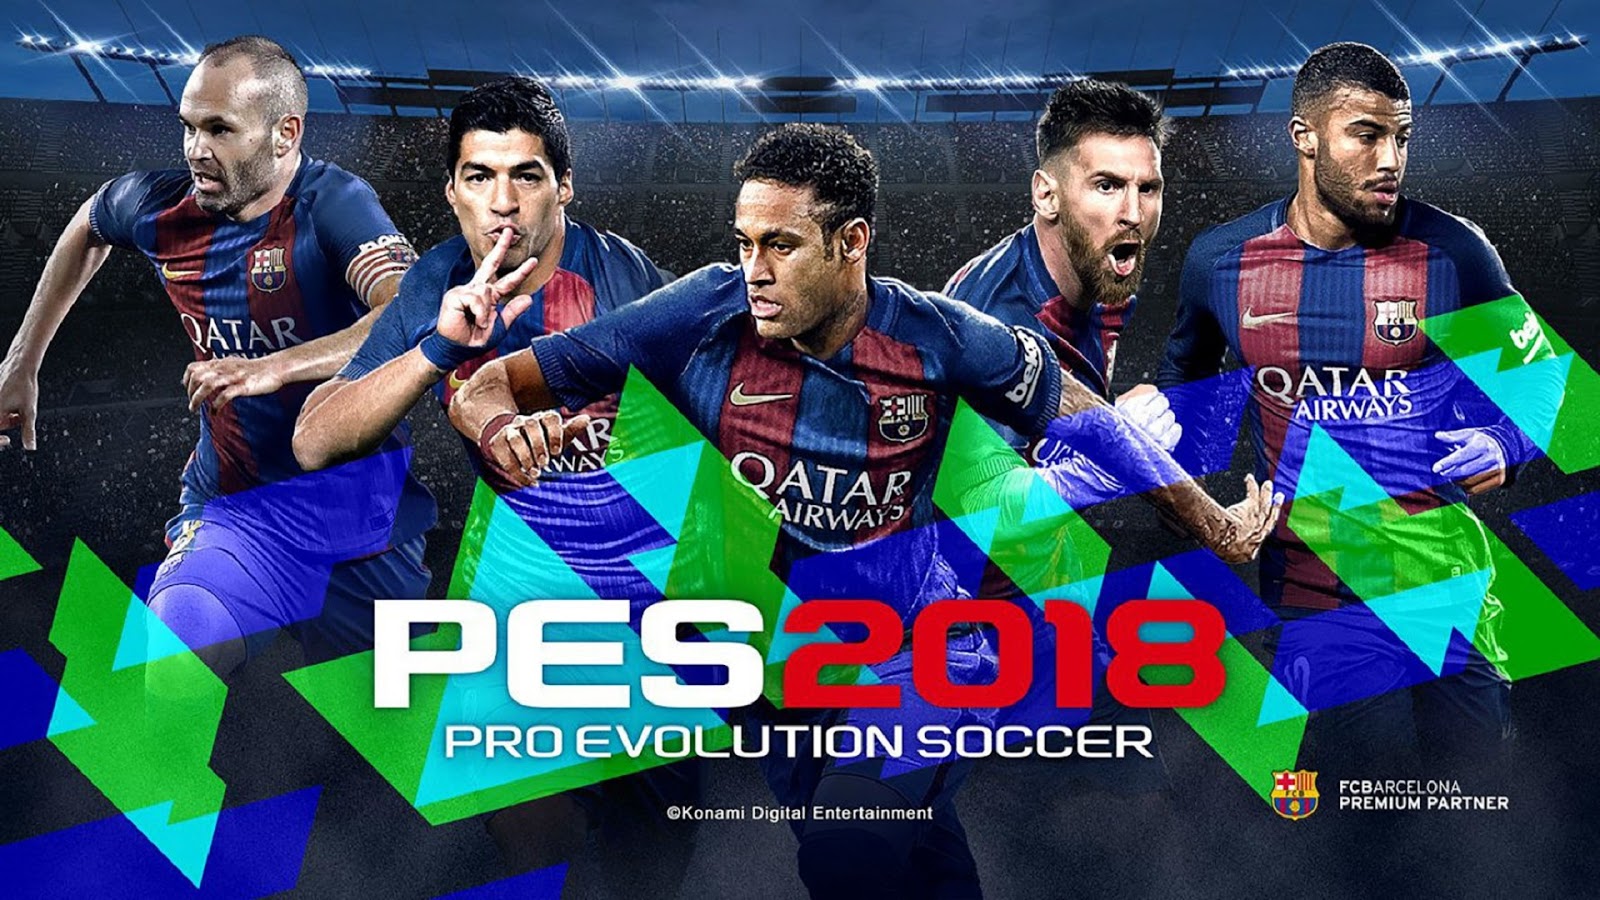 Pes 2018 game play